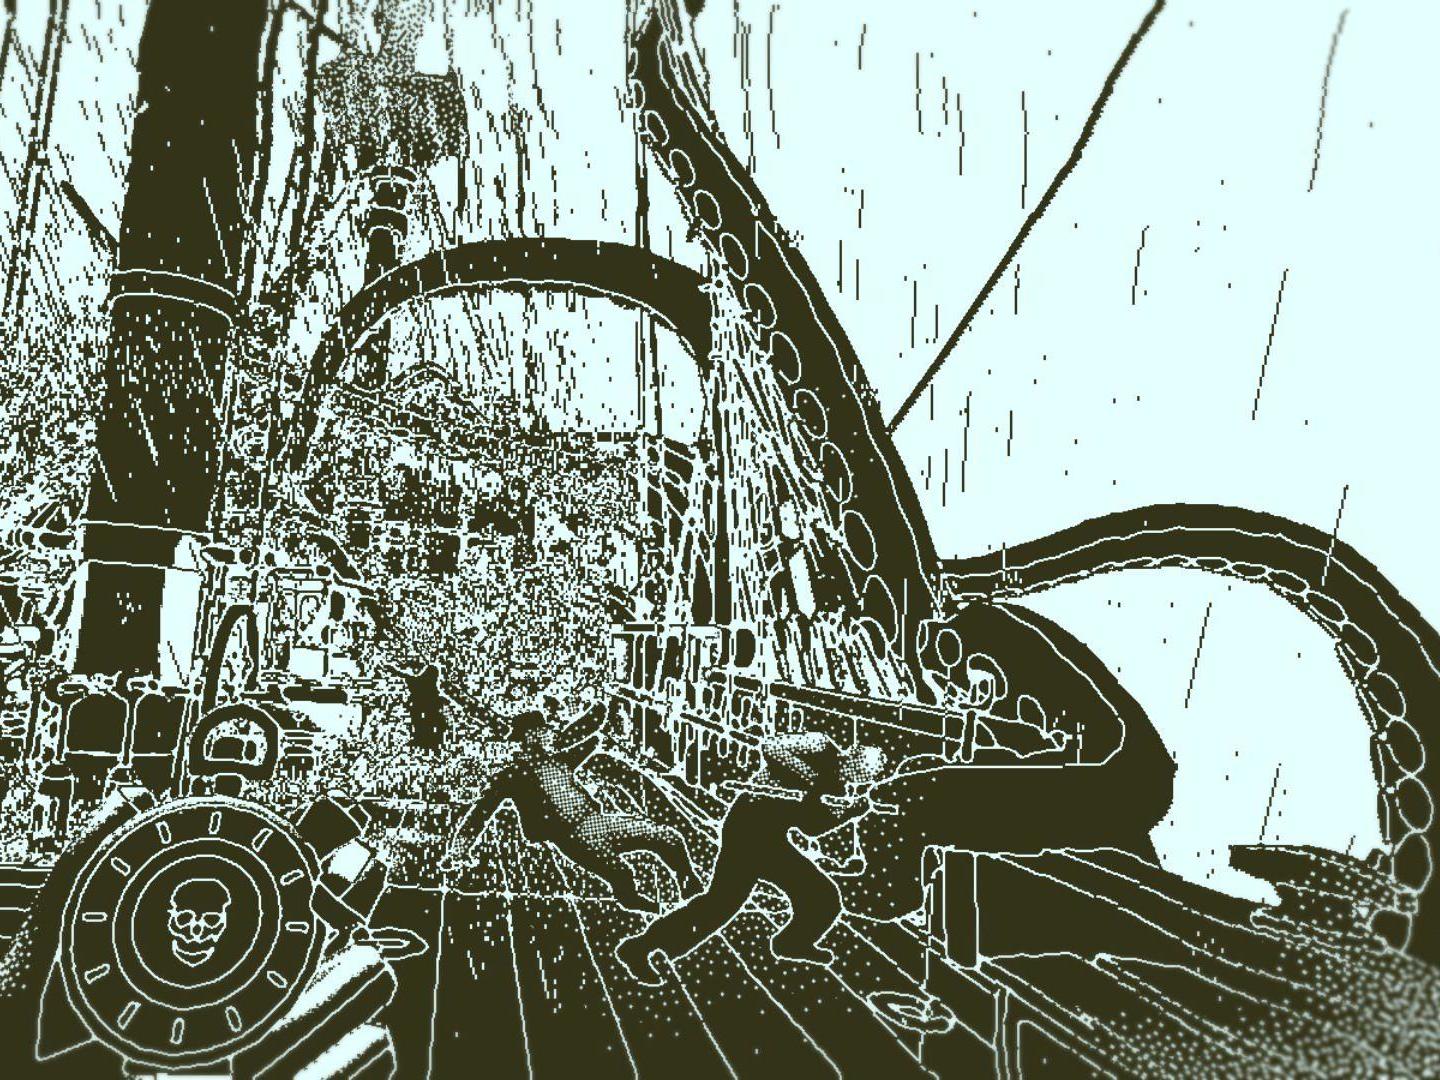 A ship is attacked by a beast from the deep in Lucas Pope's Return of the Obra Dinn